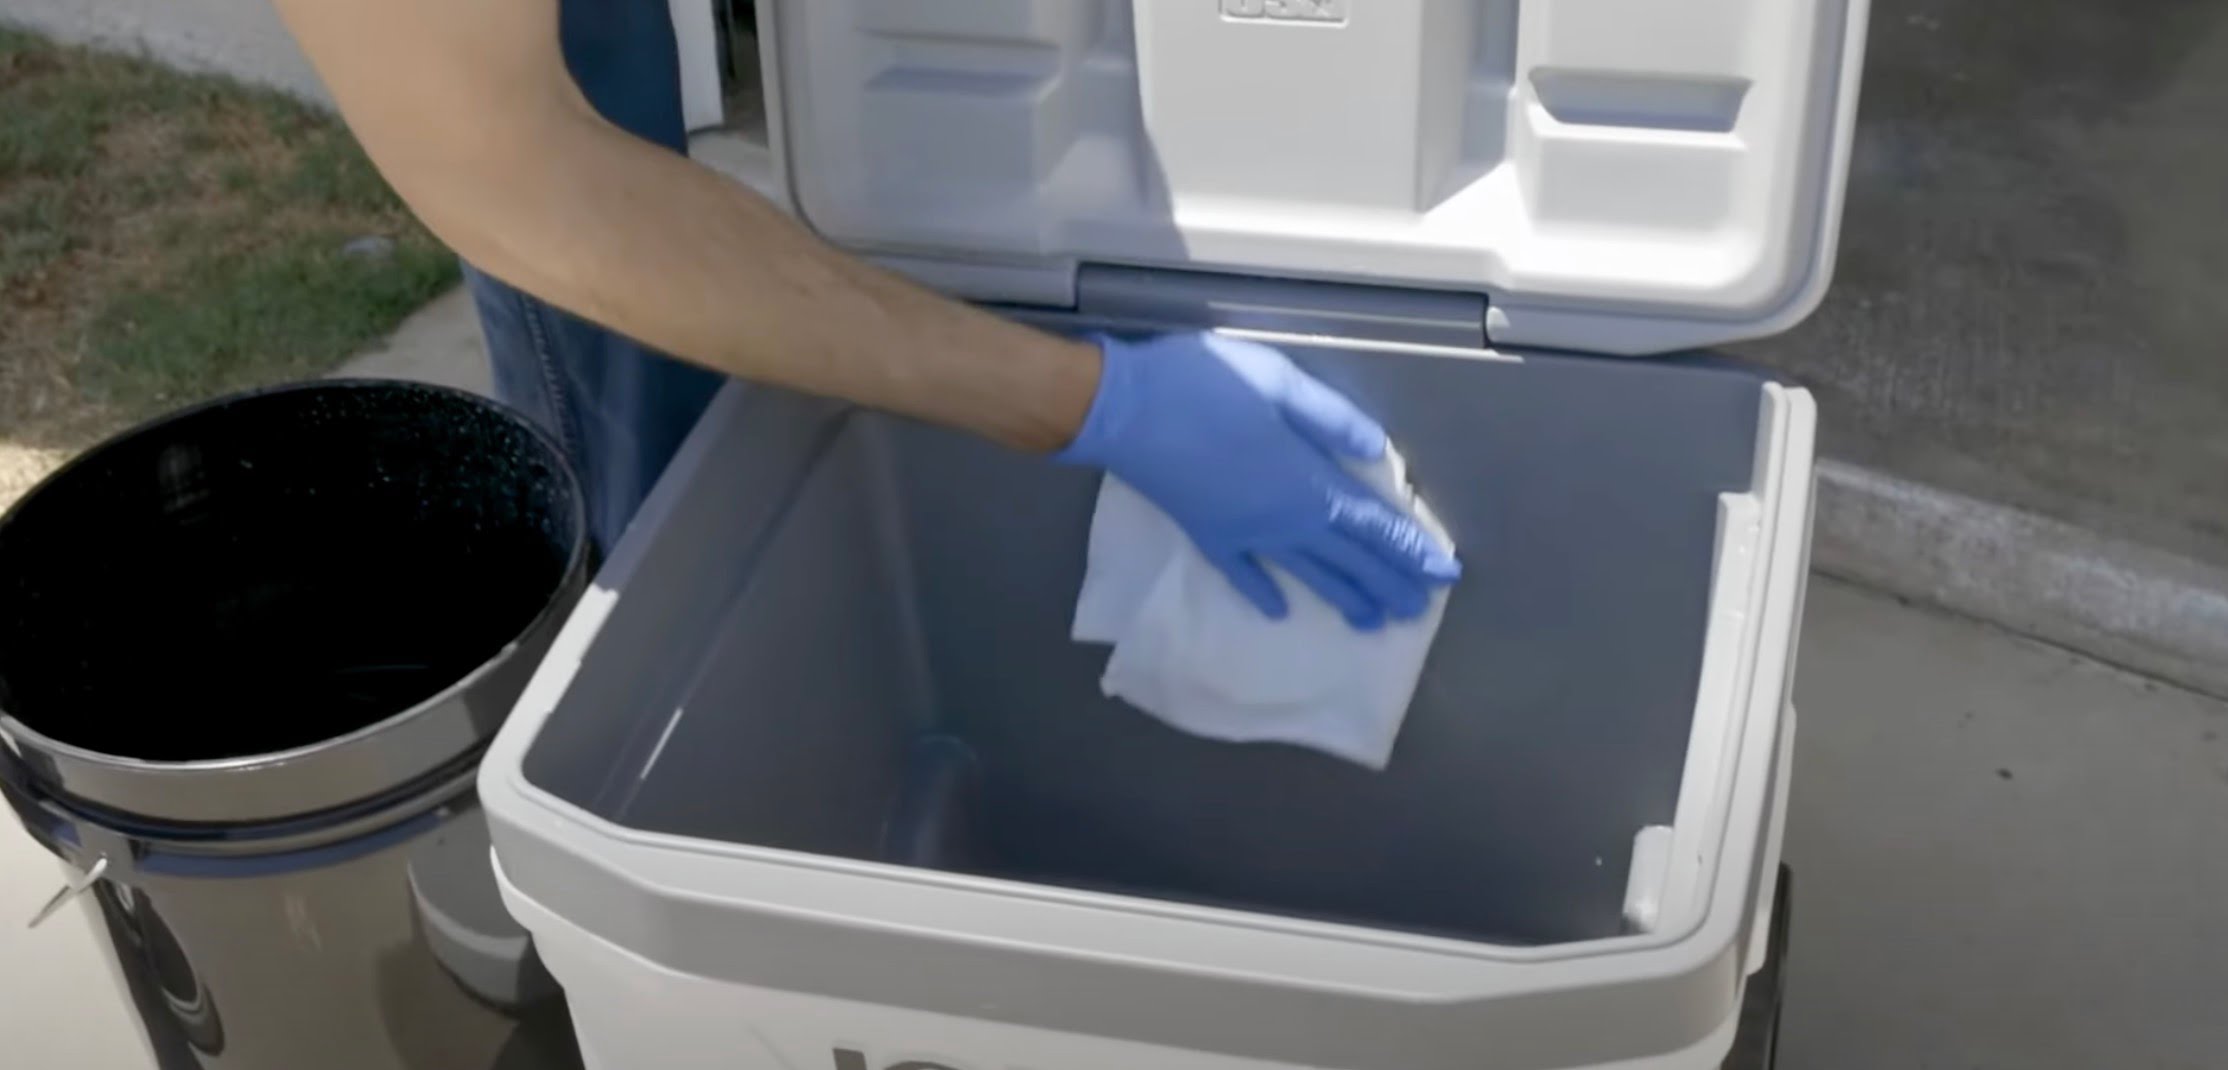 How to clean a cooler - Step 6: Rinse Again & Dry